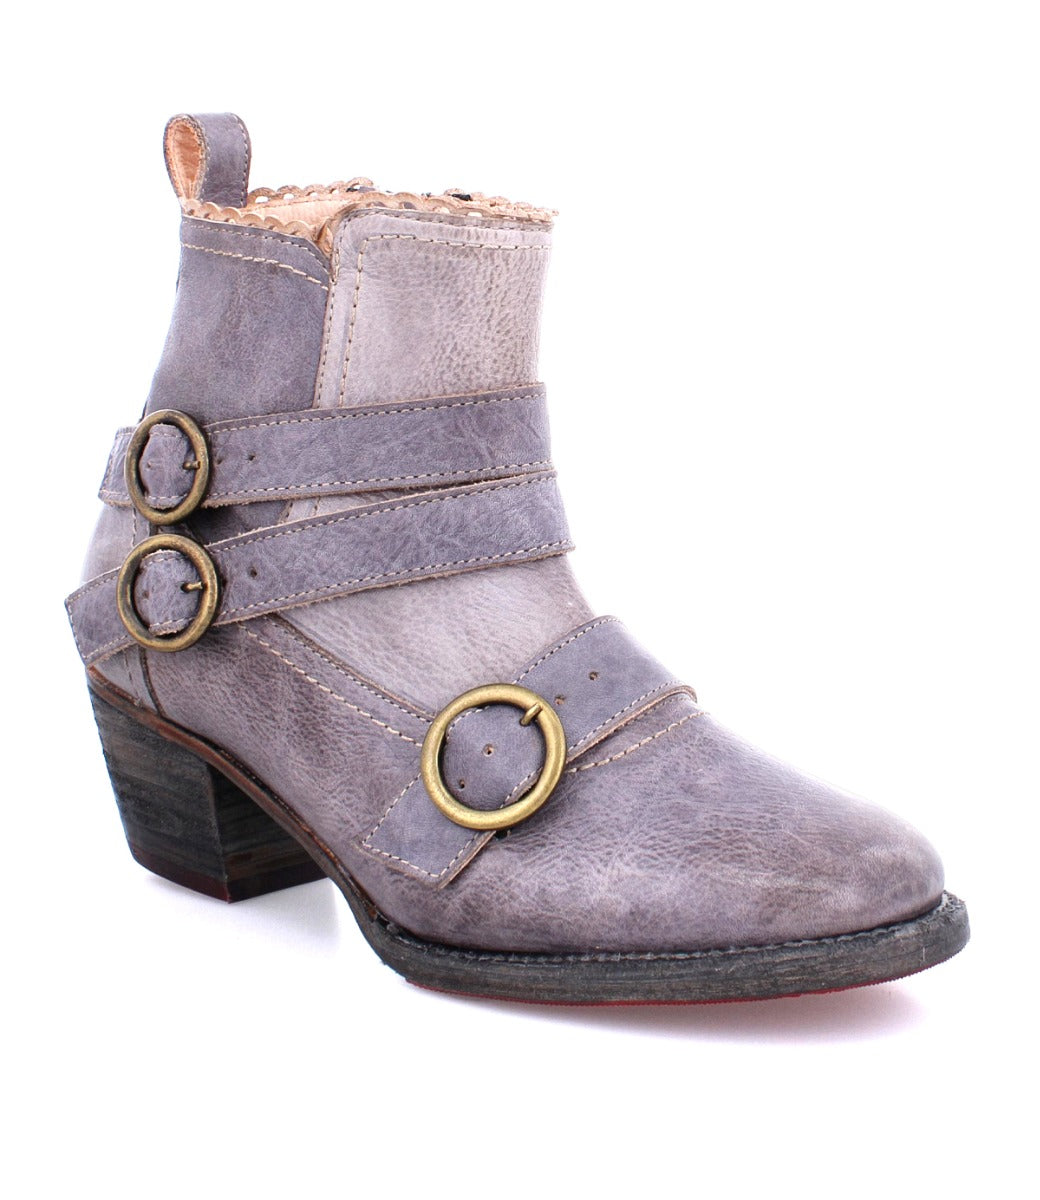 A women's Bady grey leather boot with two buckles, made of real leather from Oak Tree Farms.